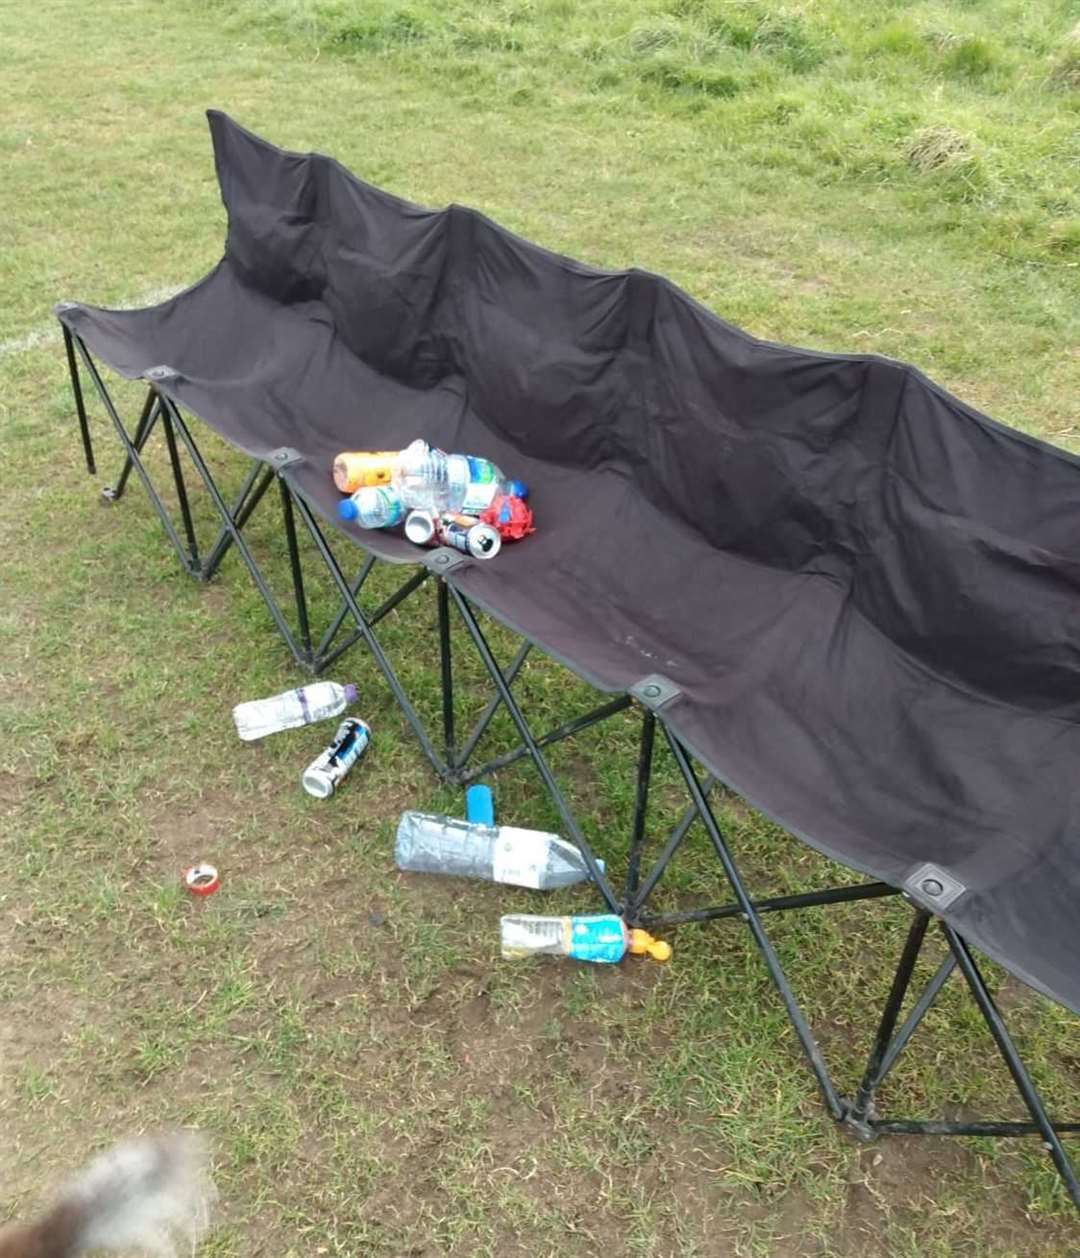 Rubbish reportedly left by football supporters after a Fleetdown United FC match. Photo: John Tidy